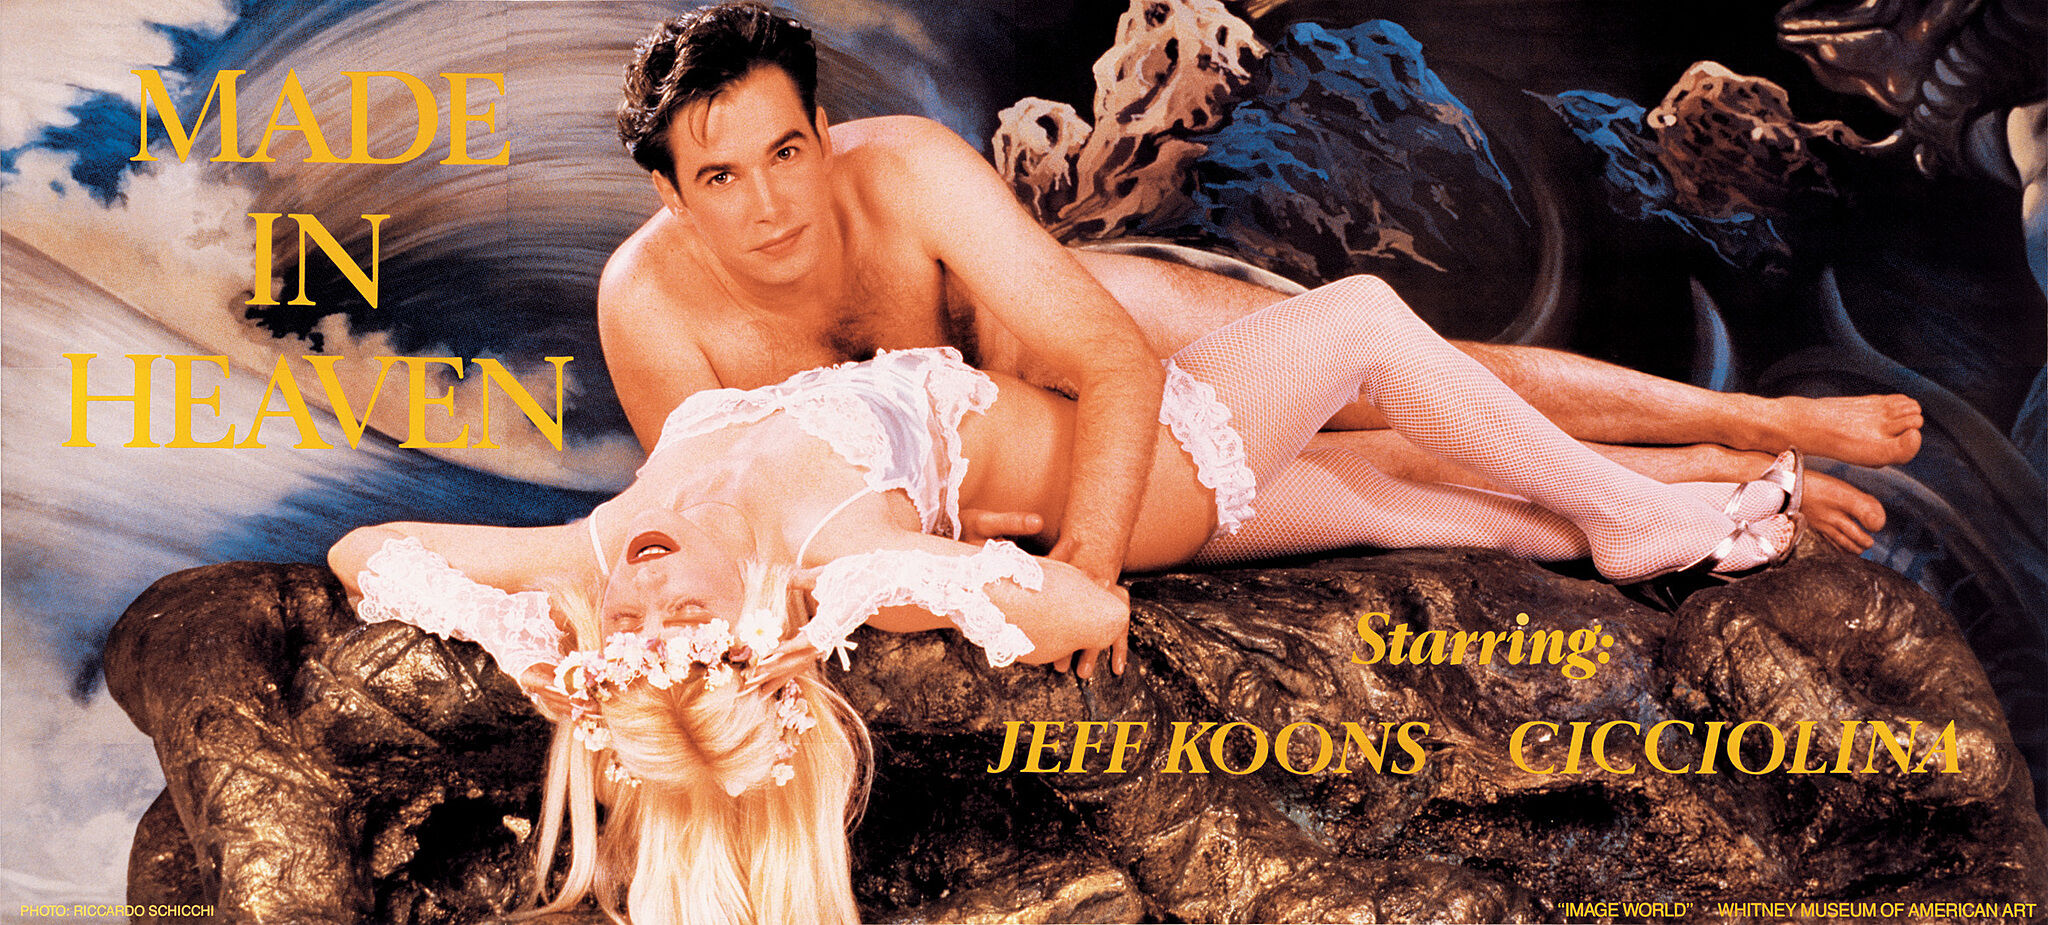 A lithograph of two figures laying over a rock with the words "Made in Heaven" and "Starring: Jeff Koons" and "Cicciolina"